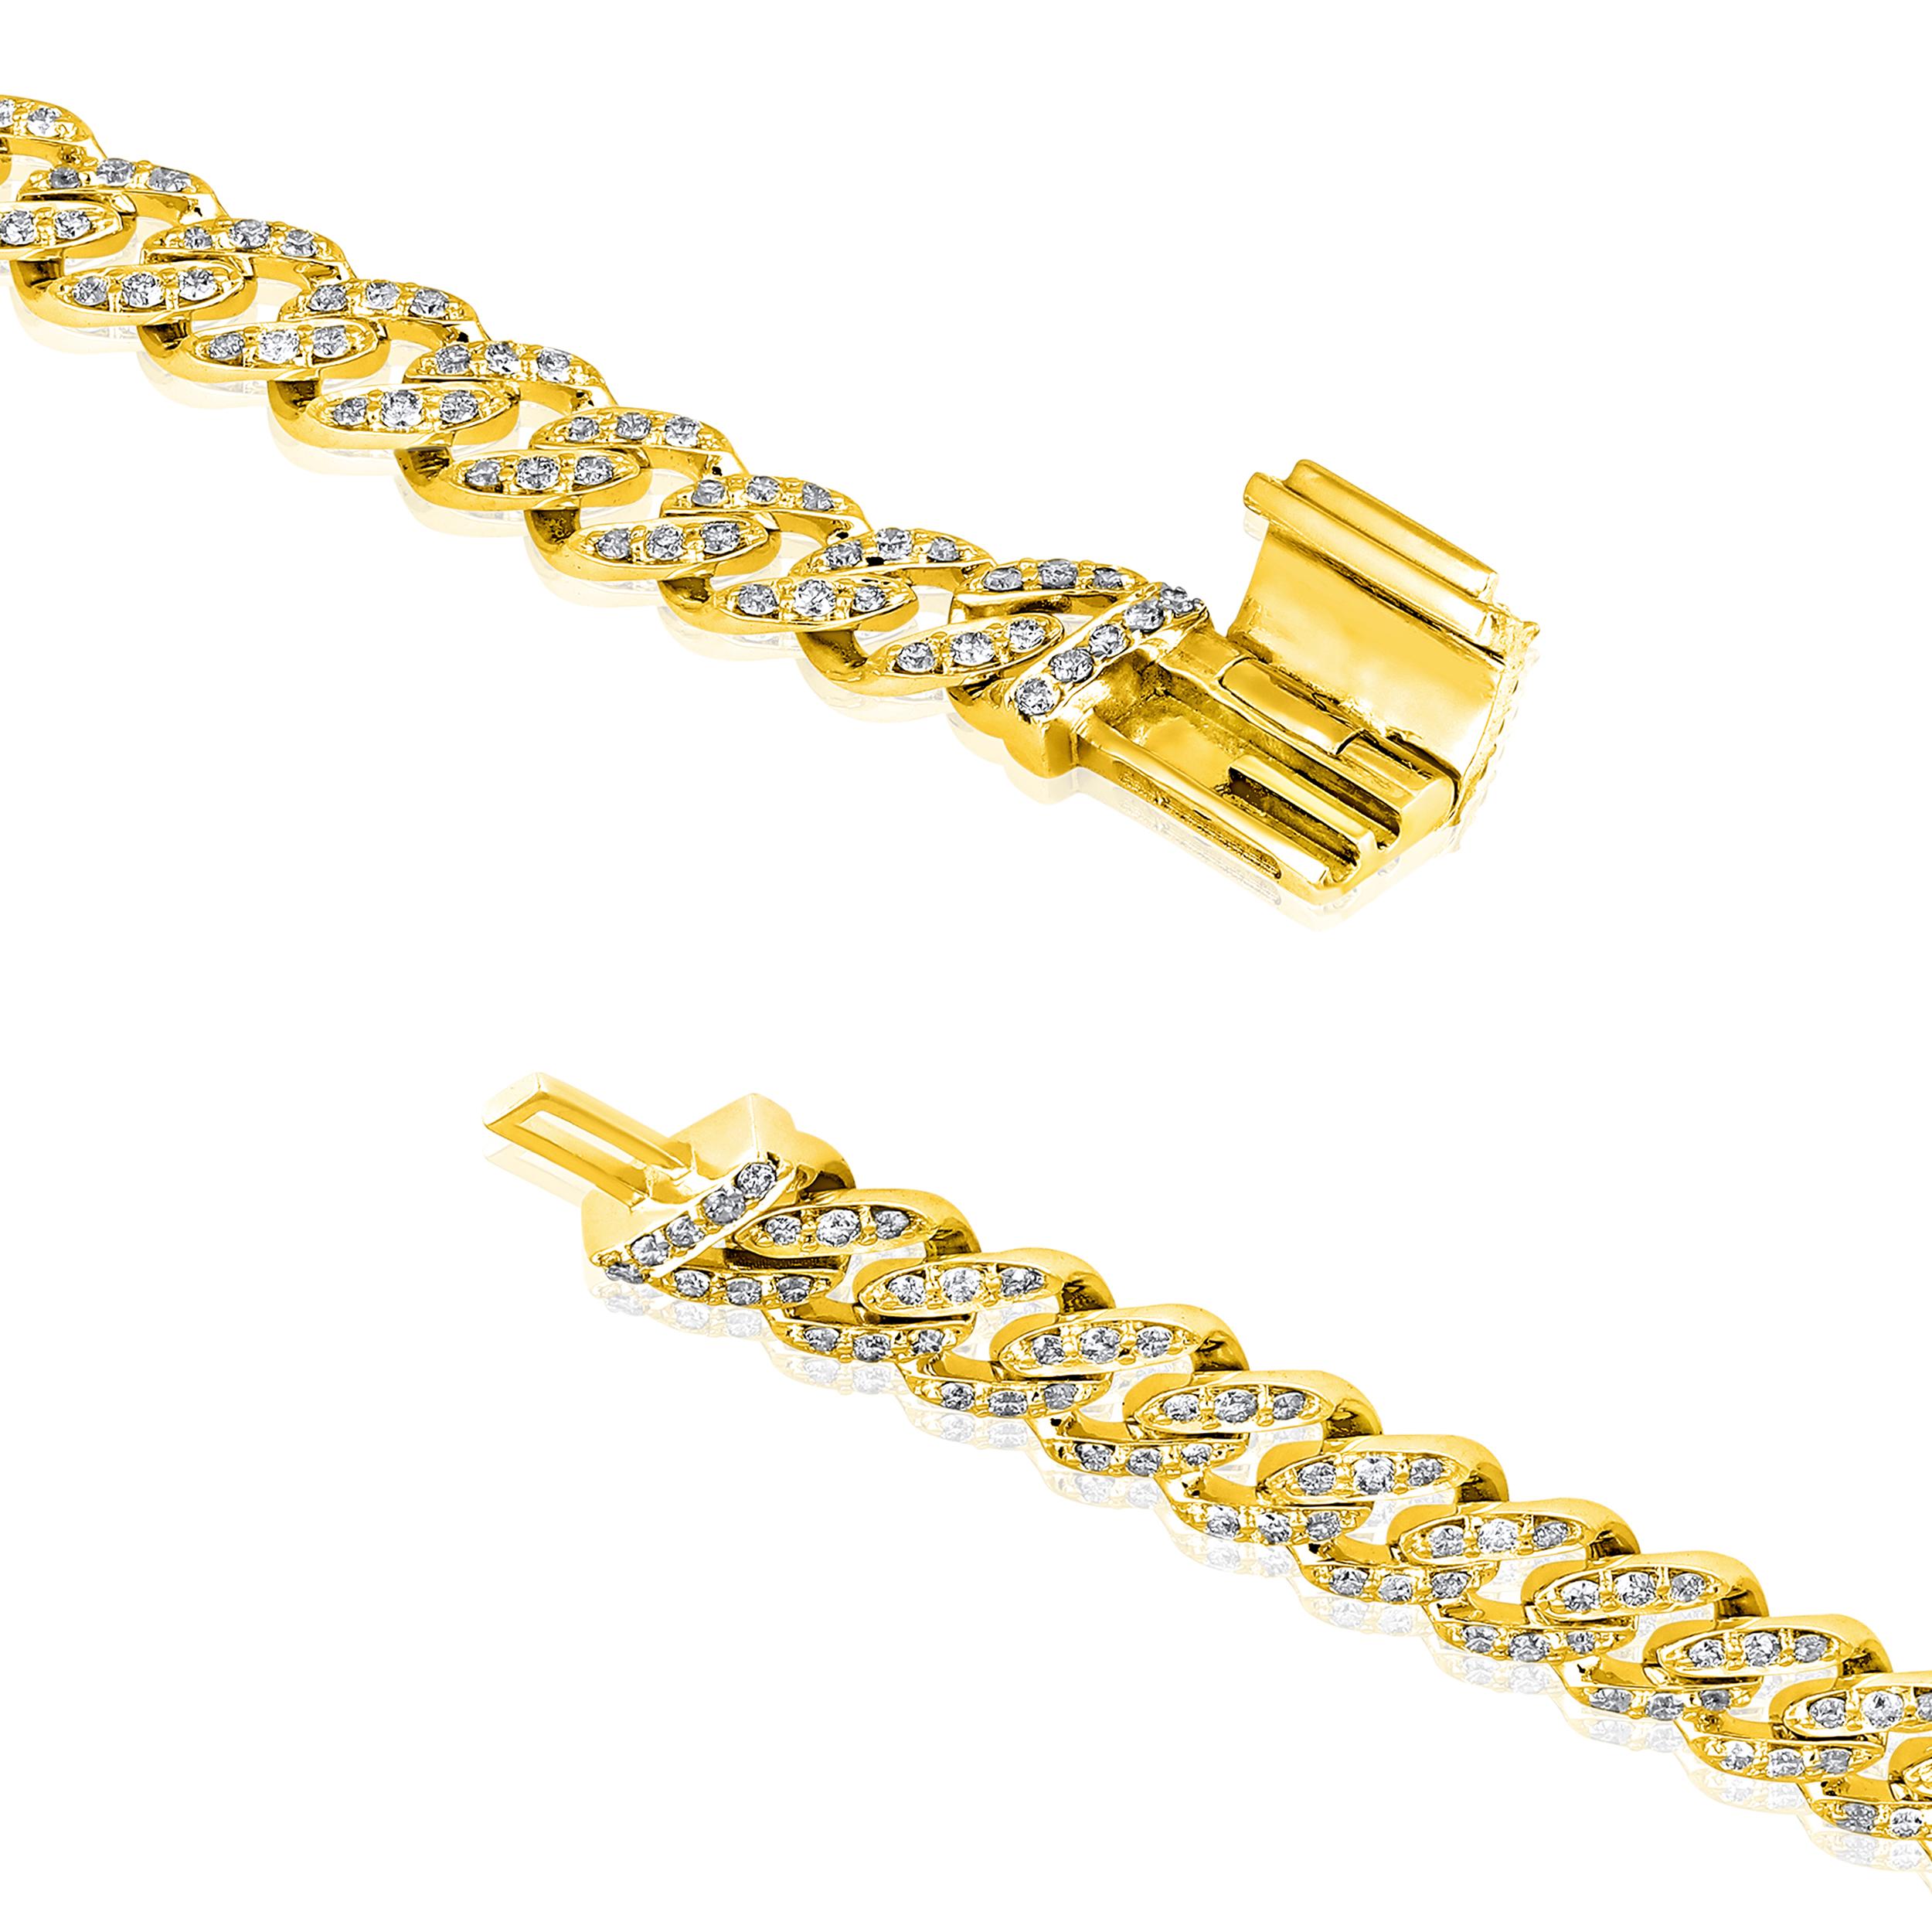 Crafted in 7.39 grams of 10K Yellow Gold, the bracelet contains 327 stones of Round Diamonds with a total of 1.33 carat in F-G color and I1-I2 carat. The bracelet length is 7 inches.

CONTEMPORARY AND TIMELESS ESSENCE: Crafted in 14-karat/18-karat